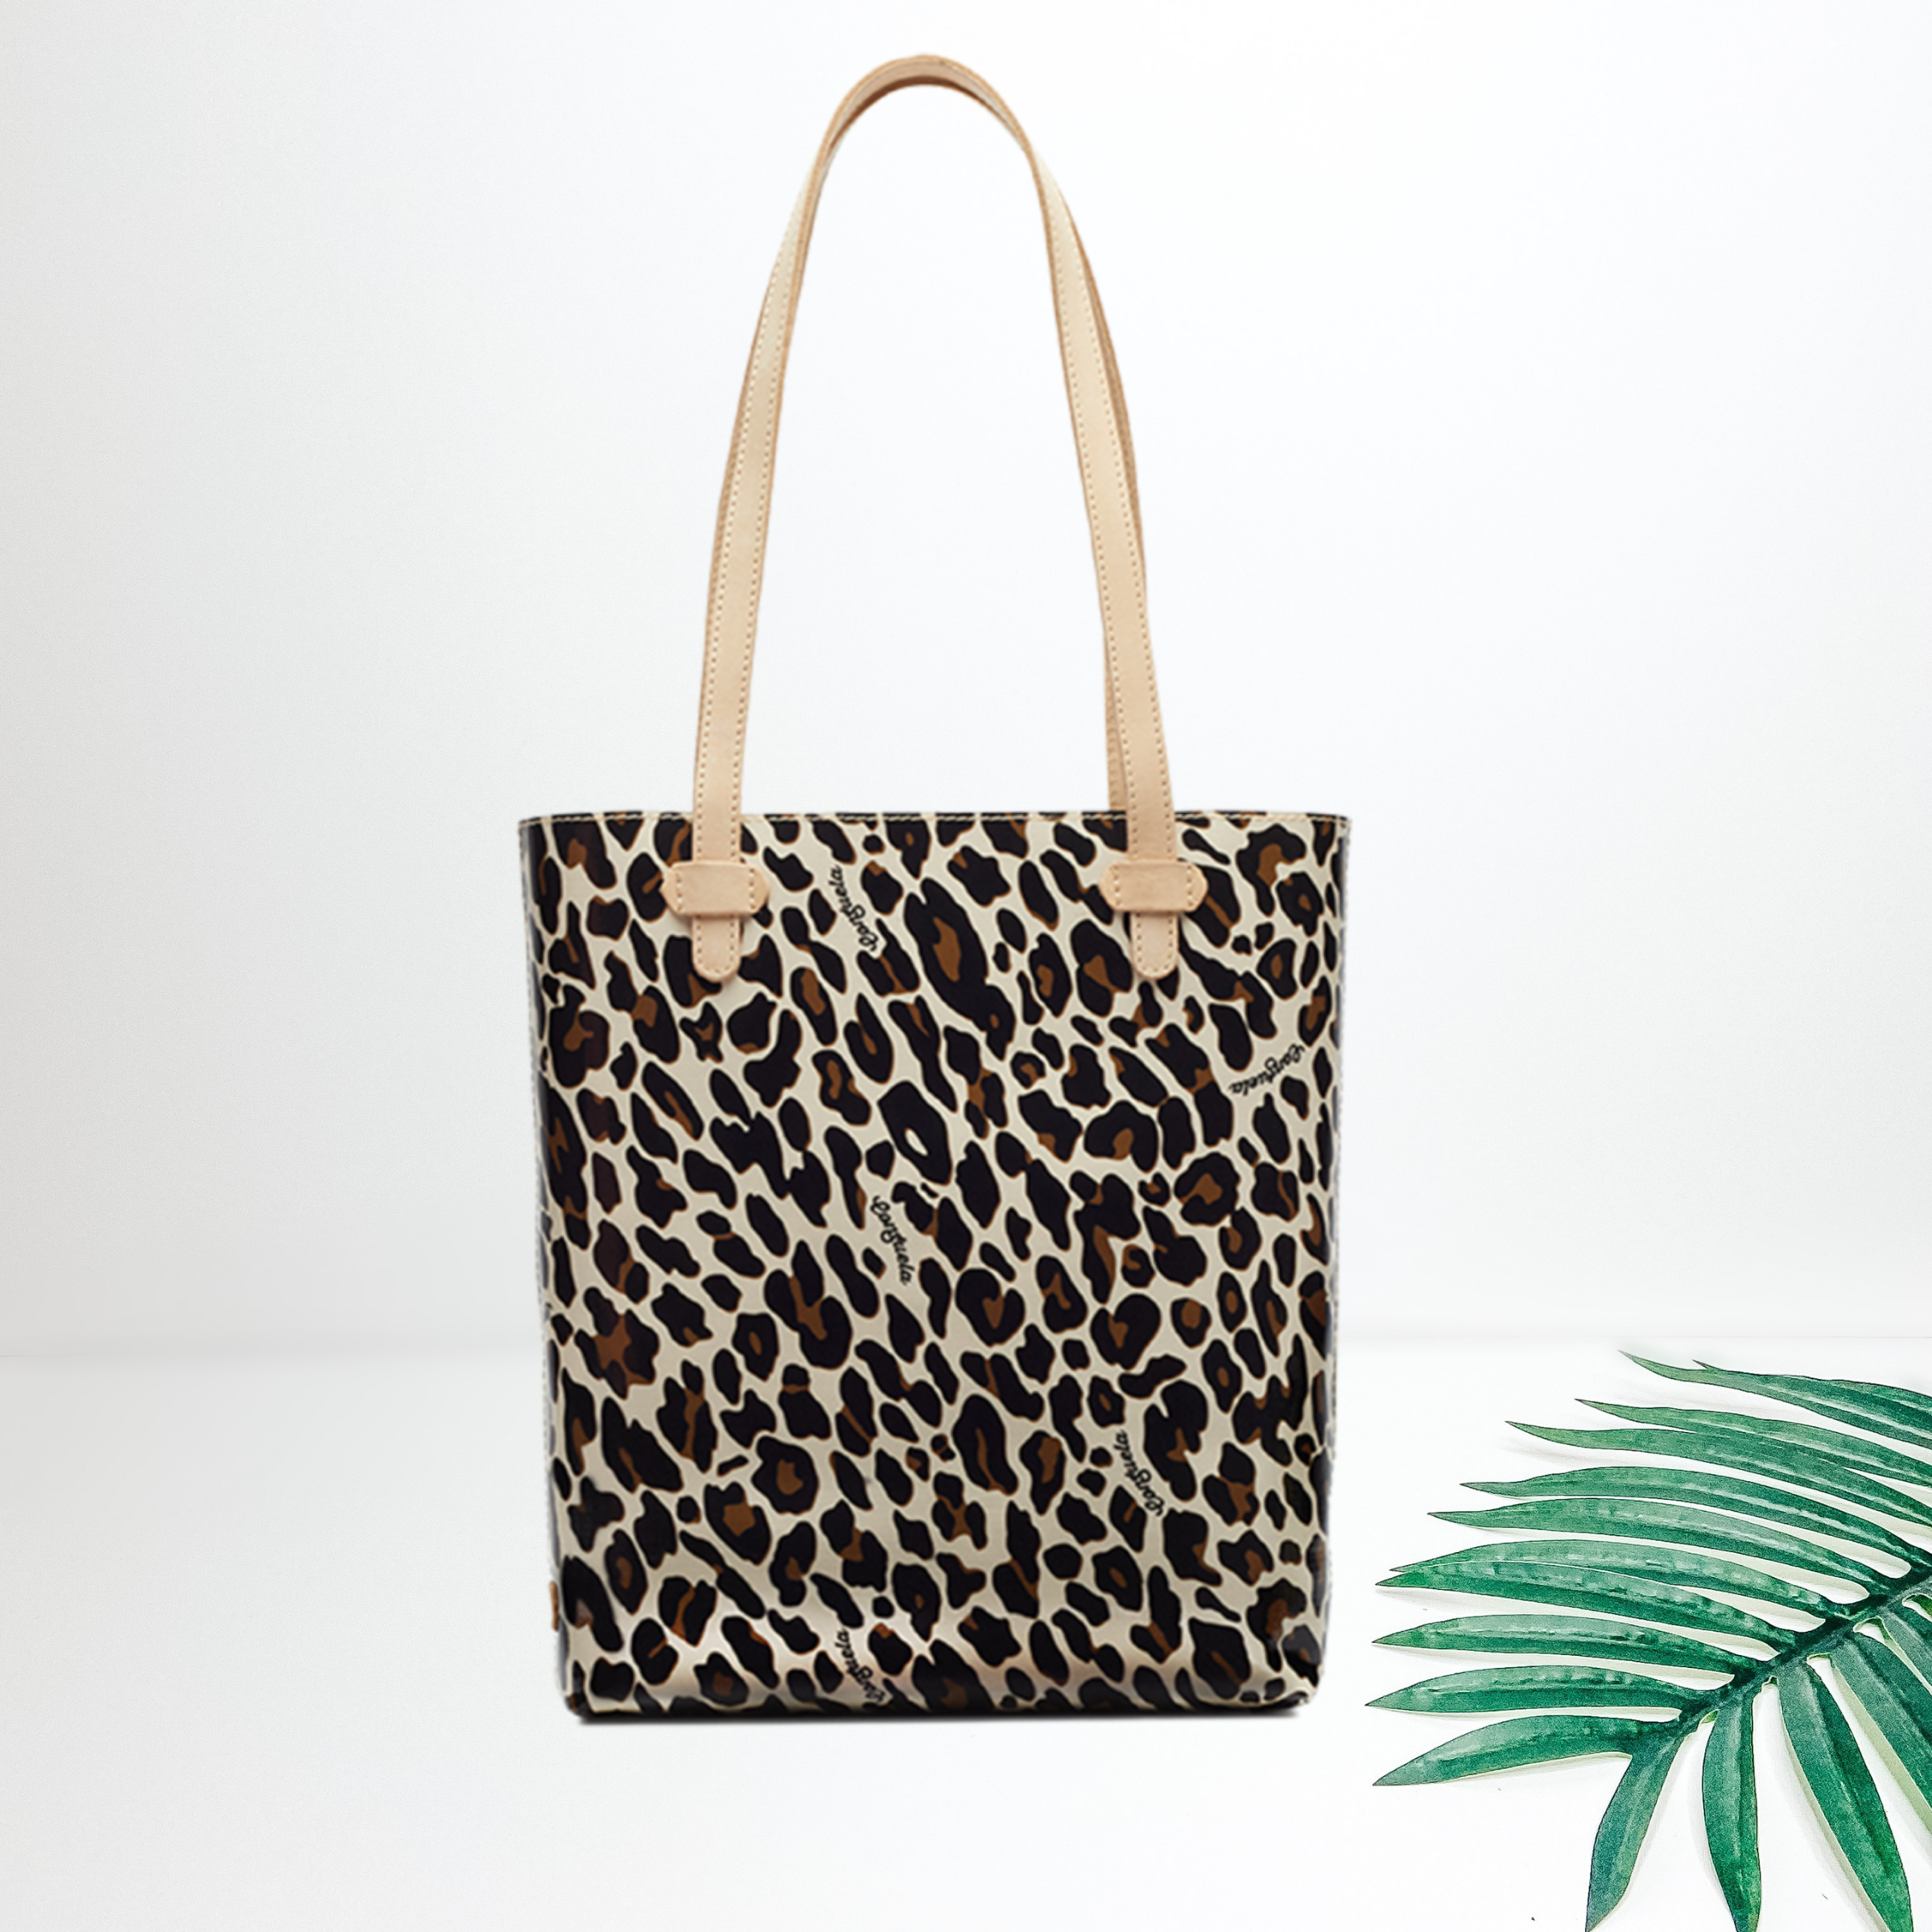 Centered in the picture is a tote bag in brown cheetah. To the right of the tote is a palm leaf, all on a white background.